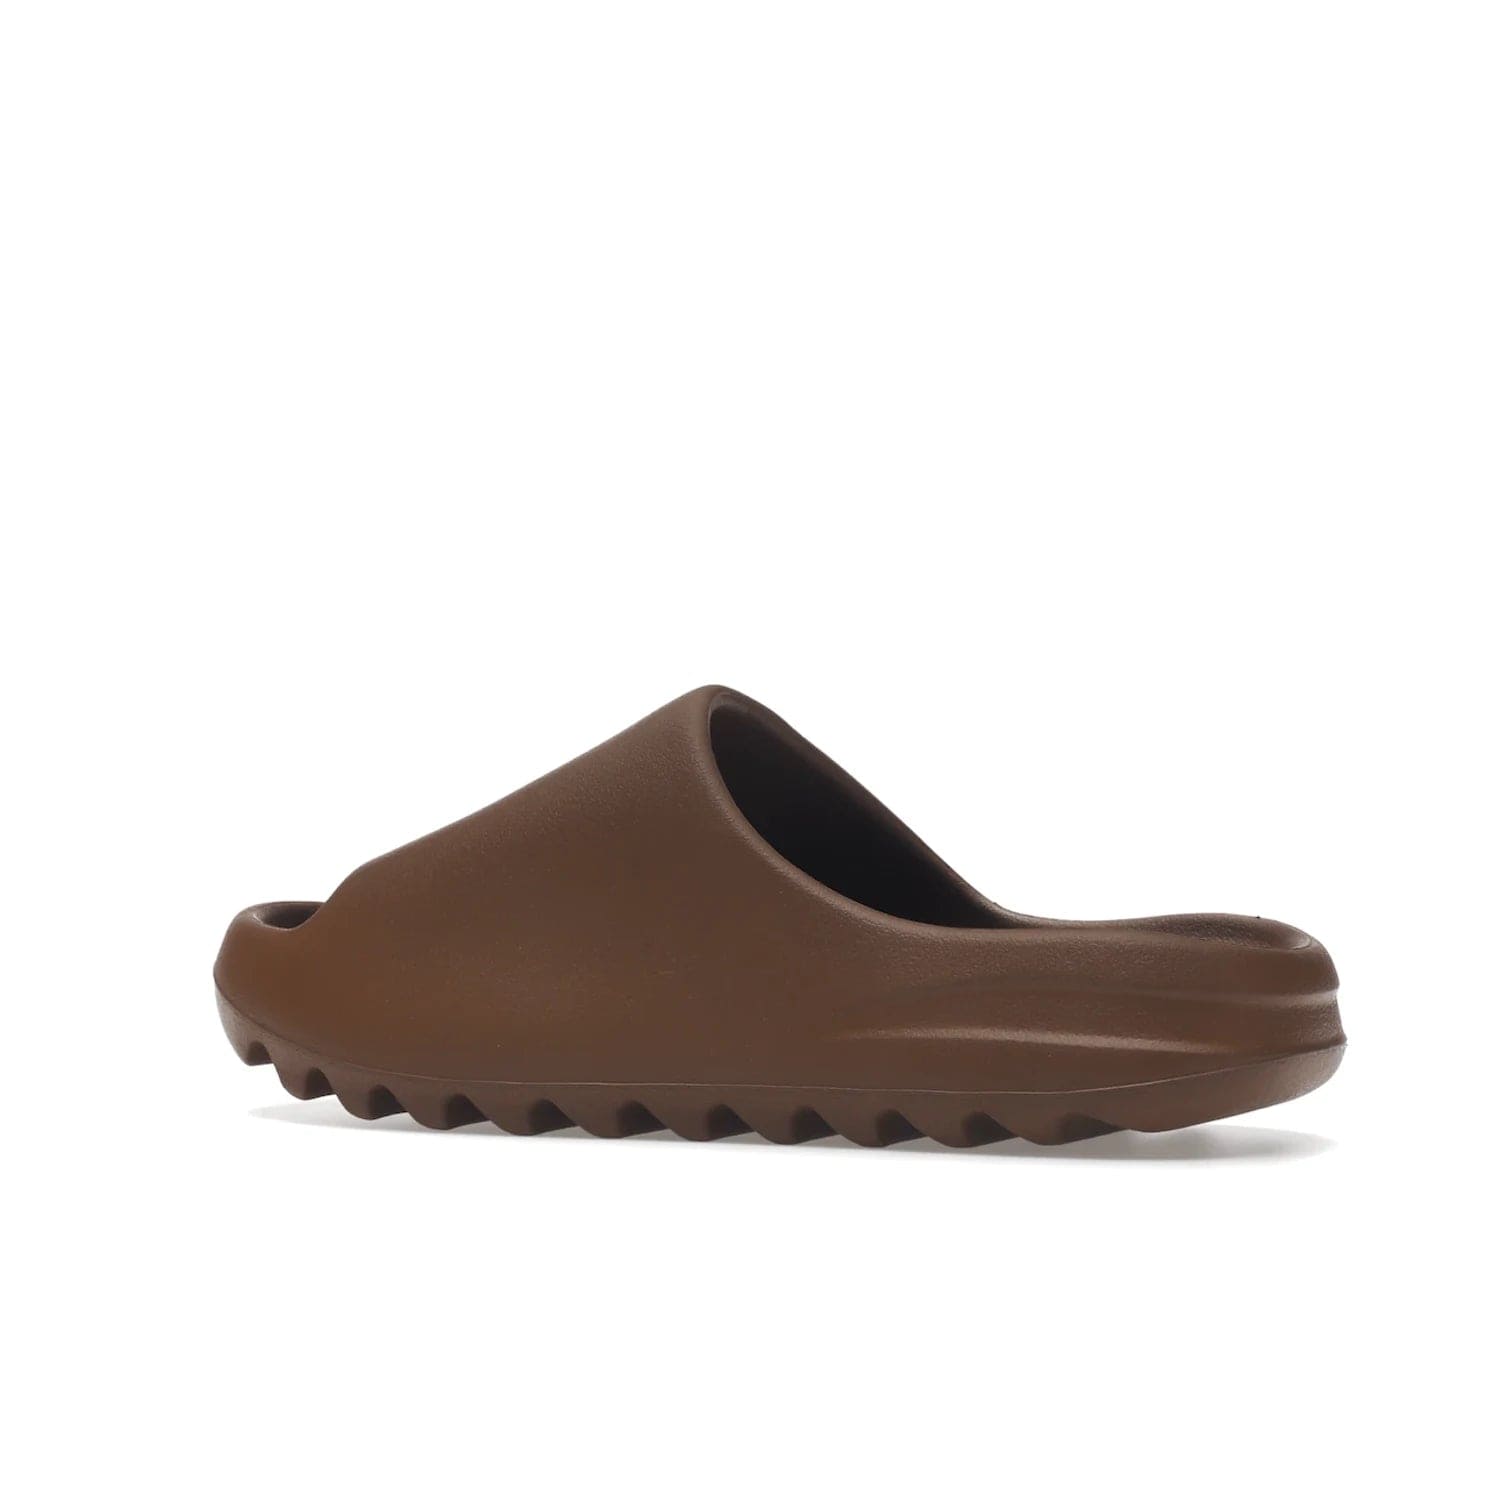 adidas Yeezy Slide Flax - Image 22 - Only at www.BallersClubKickz.com - Score the perfect casual look with the adidas Yeezy Slide Flax. Made with lightweight injected EVA plus horizontal grooves underfoot for traction. Release on August 22, 2022. $70.